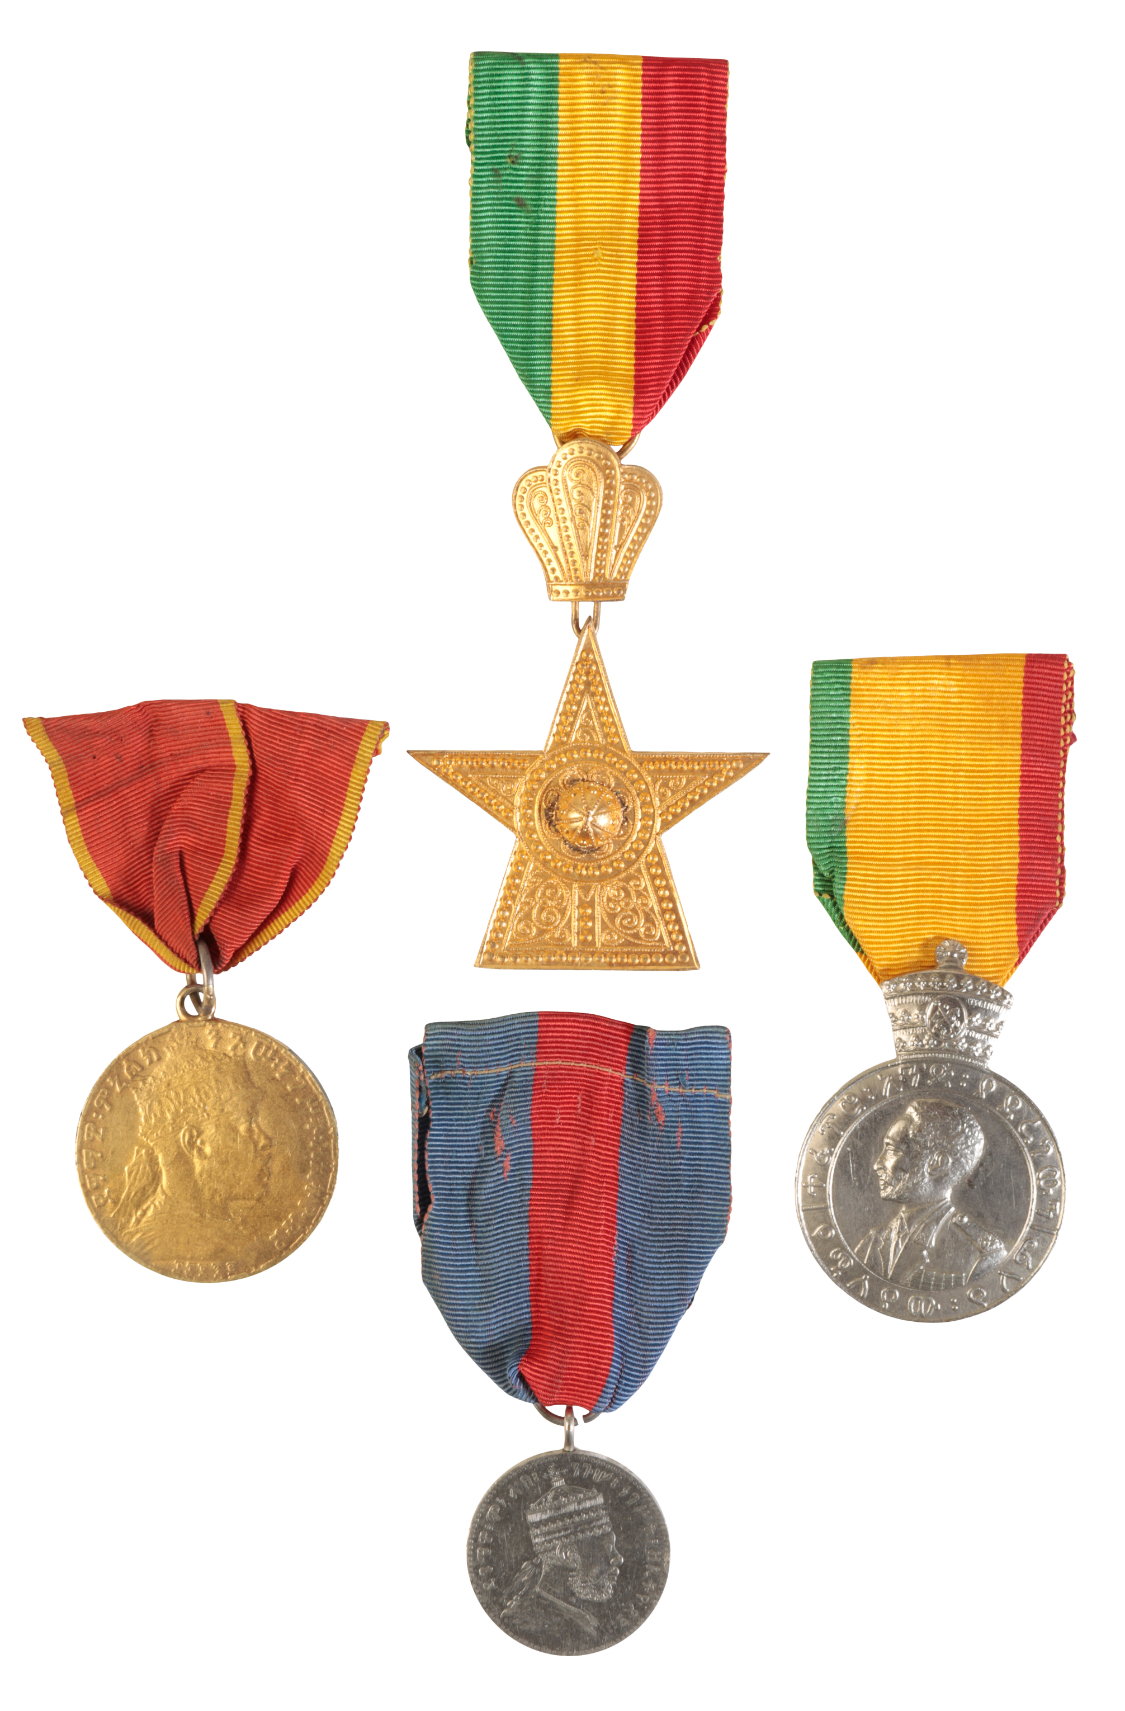 ETHIOPIA. FOUR ORDERS AND MEDALS